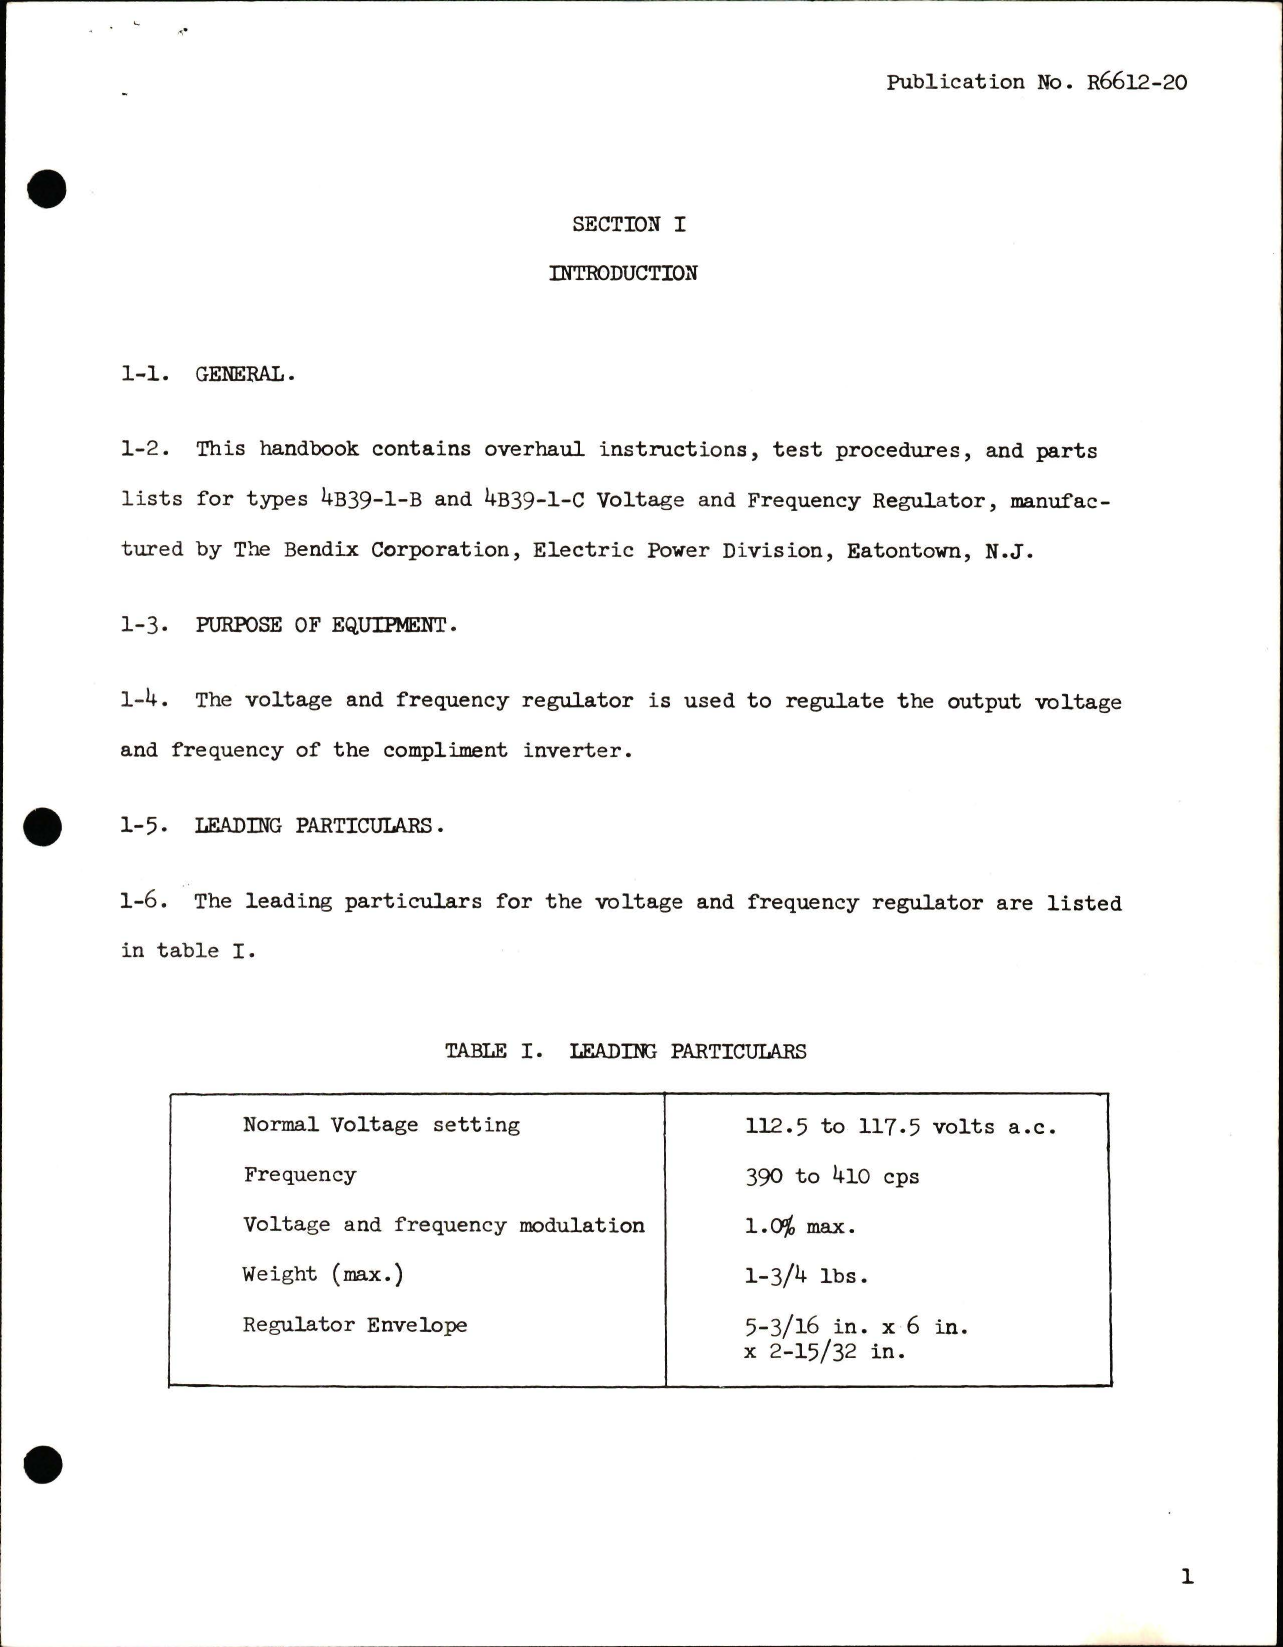 Sample page 7 from AirCorps Library document: Overhaul Instructions with Parts List for Voltage & Frequency Regulator - Types 4B39-1-B, 4B39-1-C